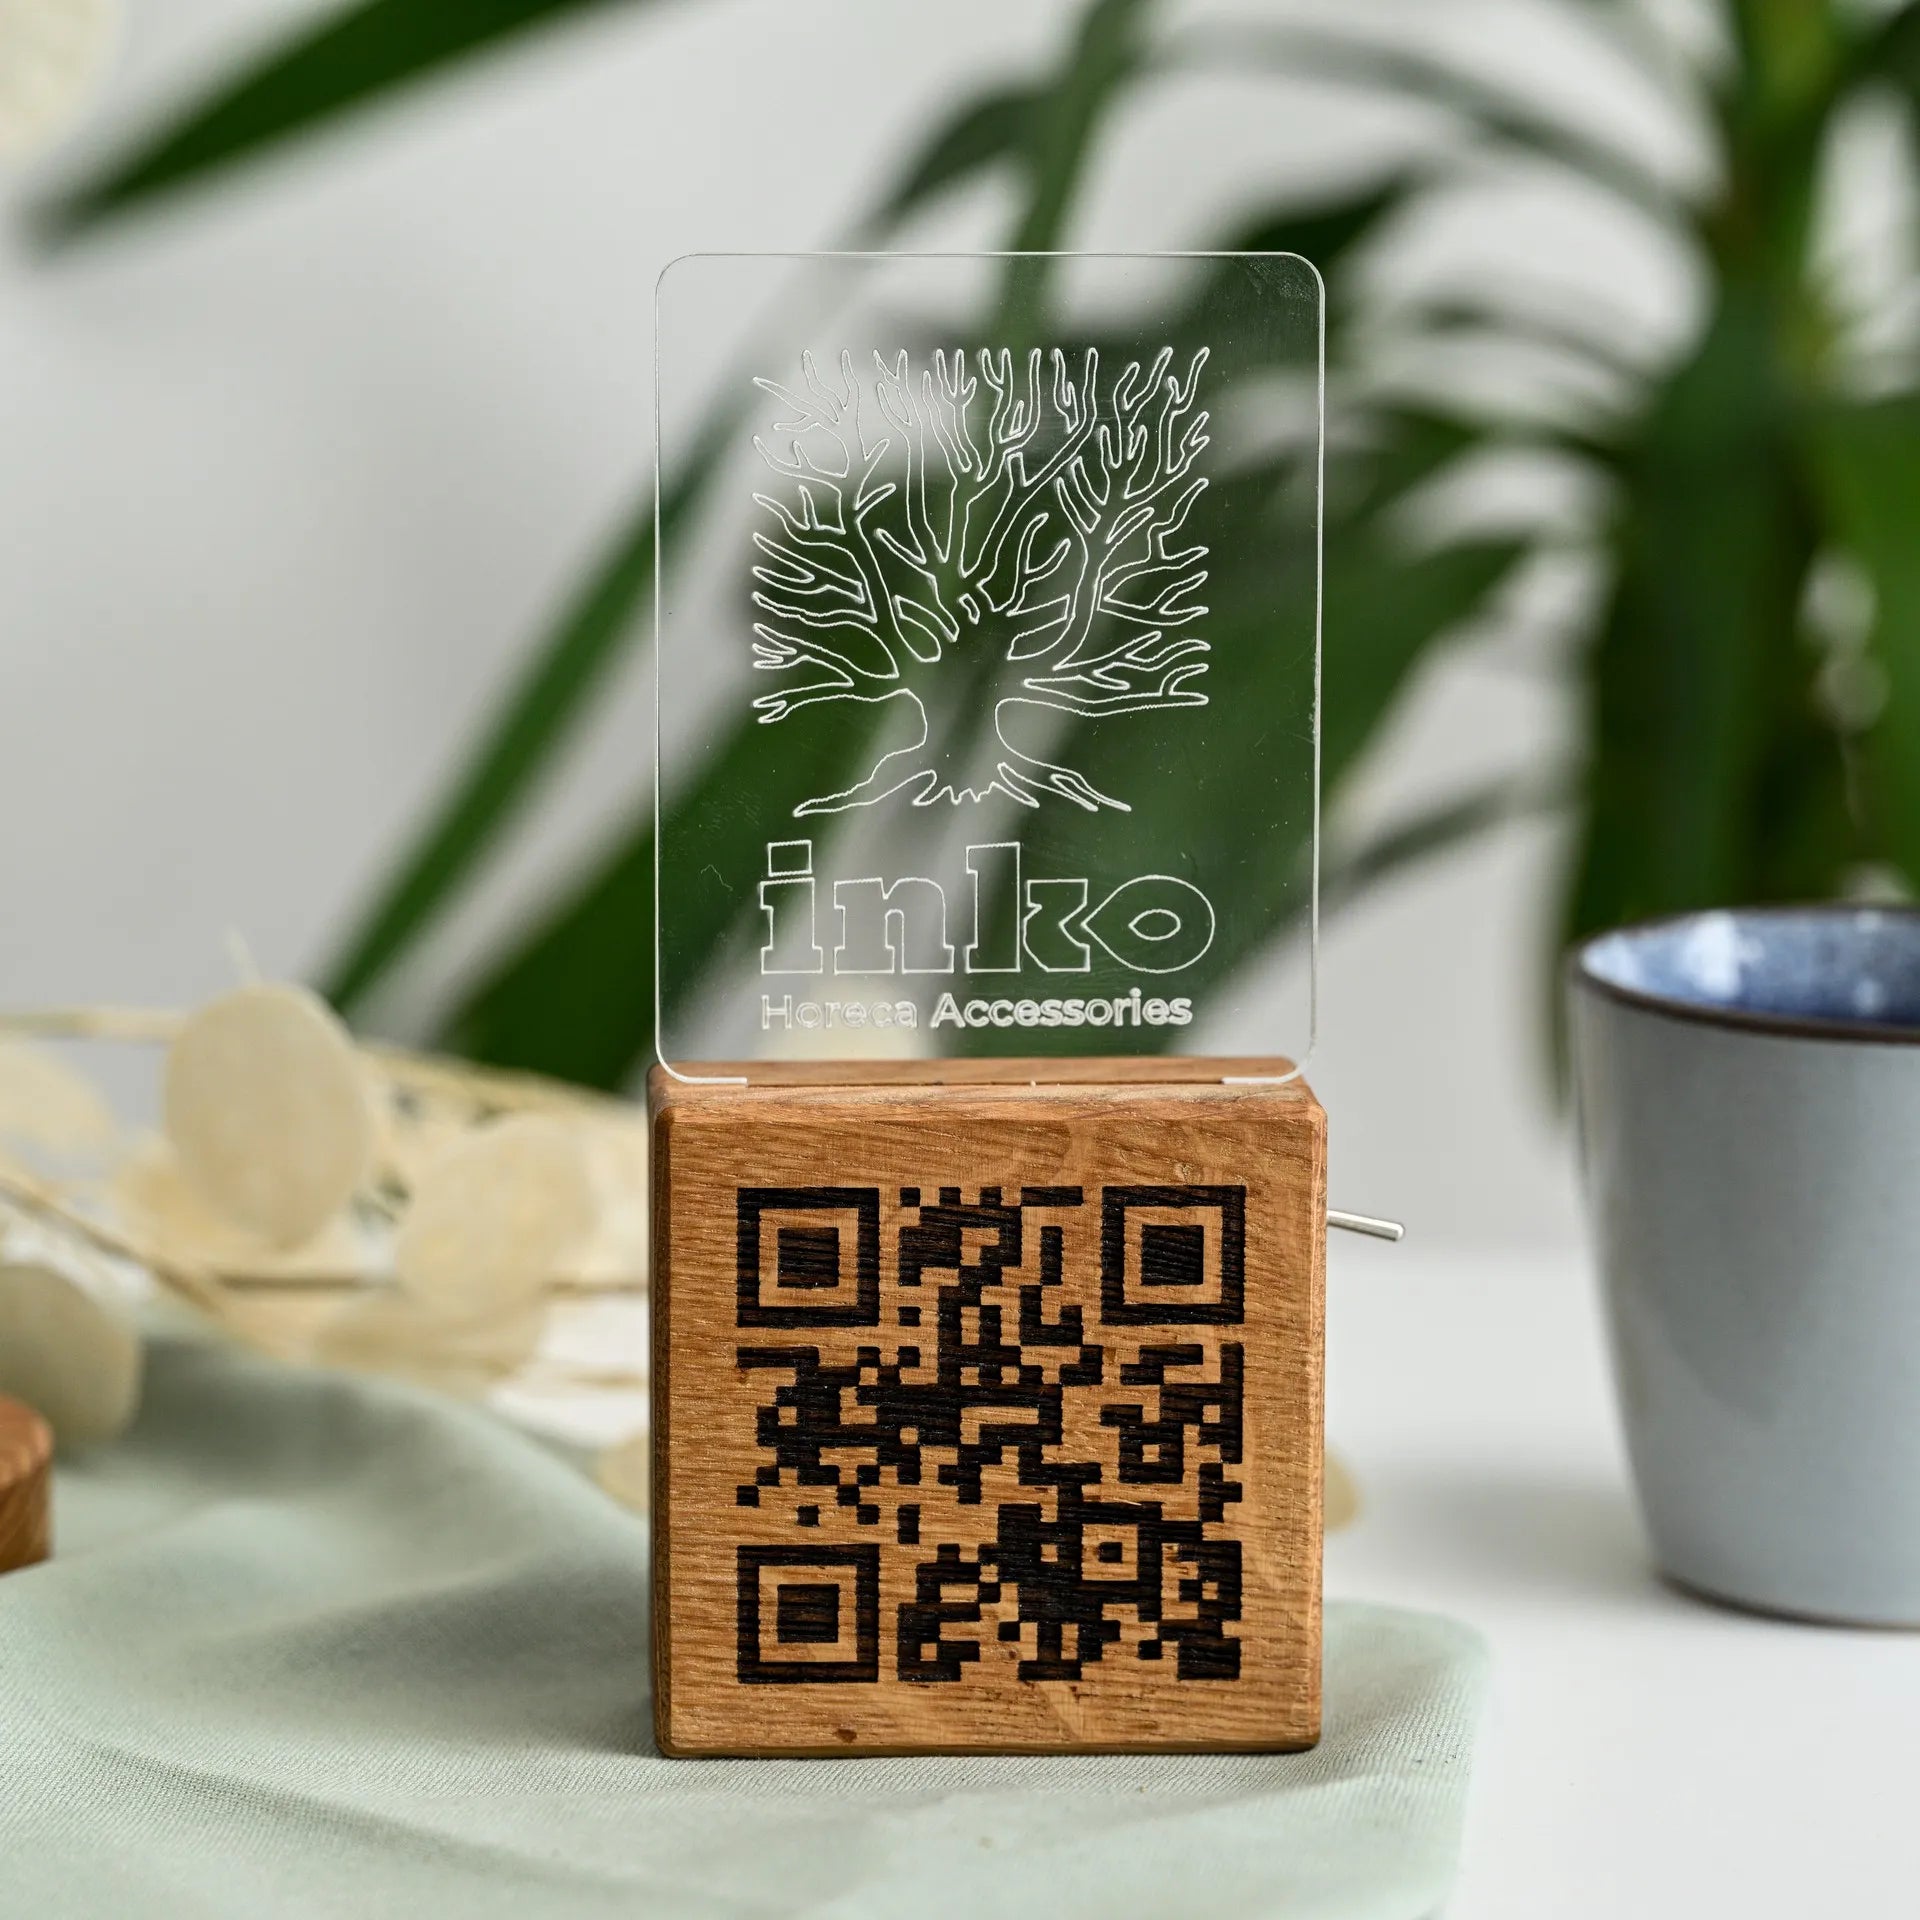 Illuminate your QR code with our acrylic plate solution.